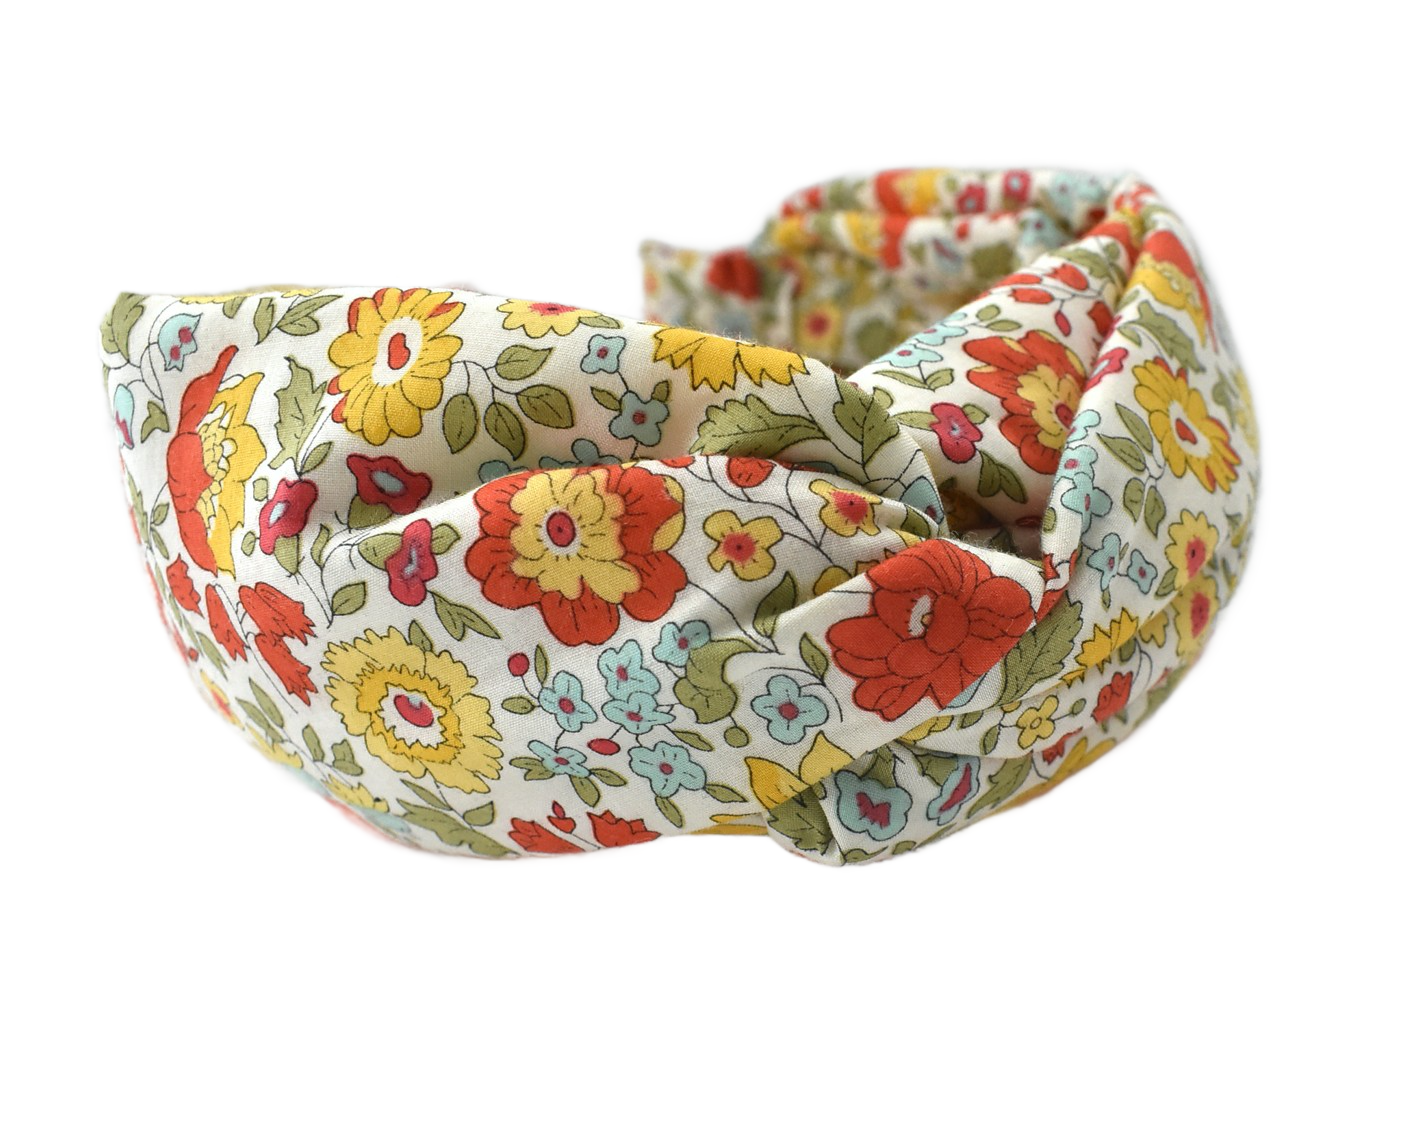 Twisted Alice Headband - Liberty of London Yellow D'anjo floral print